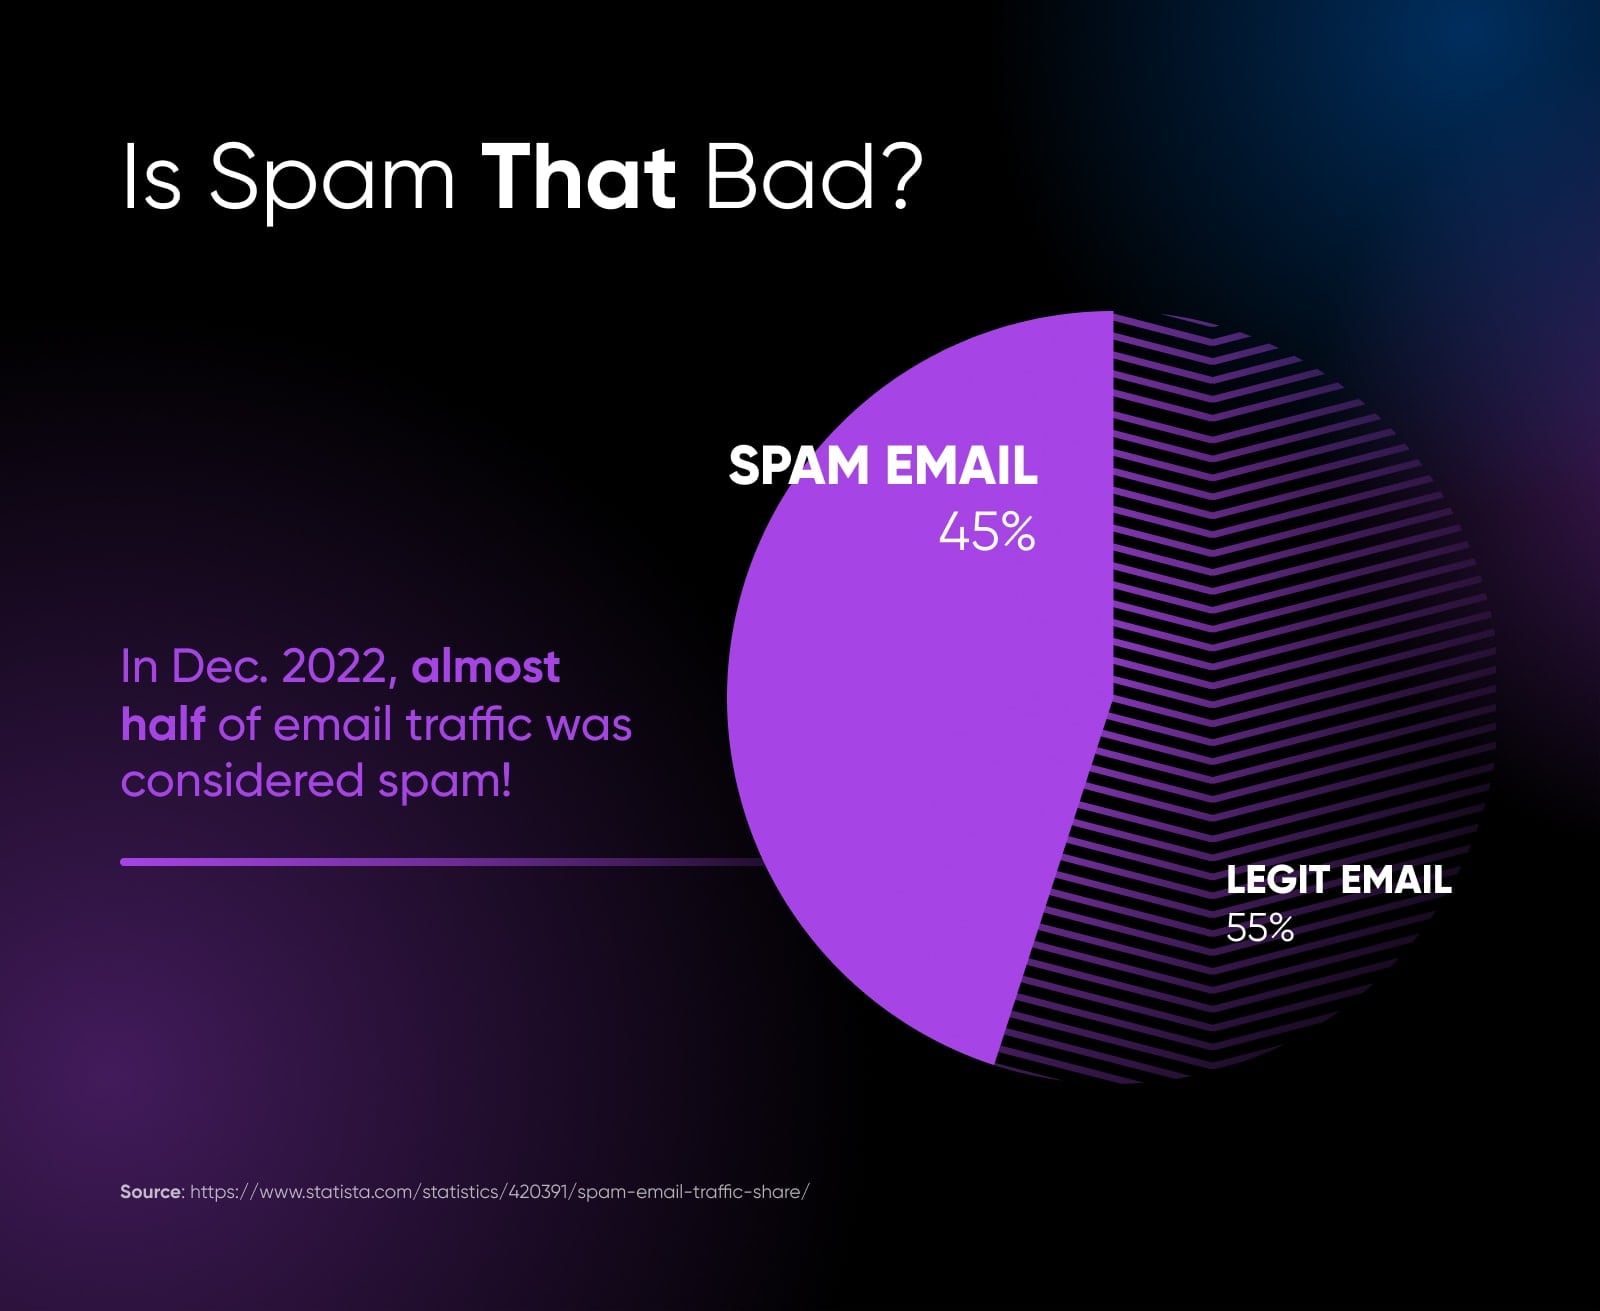 circle graph comparing how much spam email (45%) to legit email (55%) from a December 2022 study 